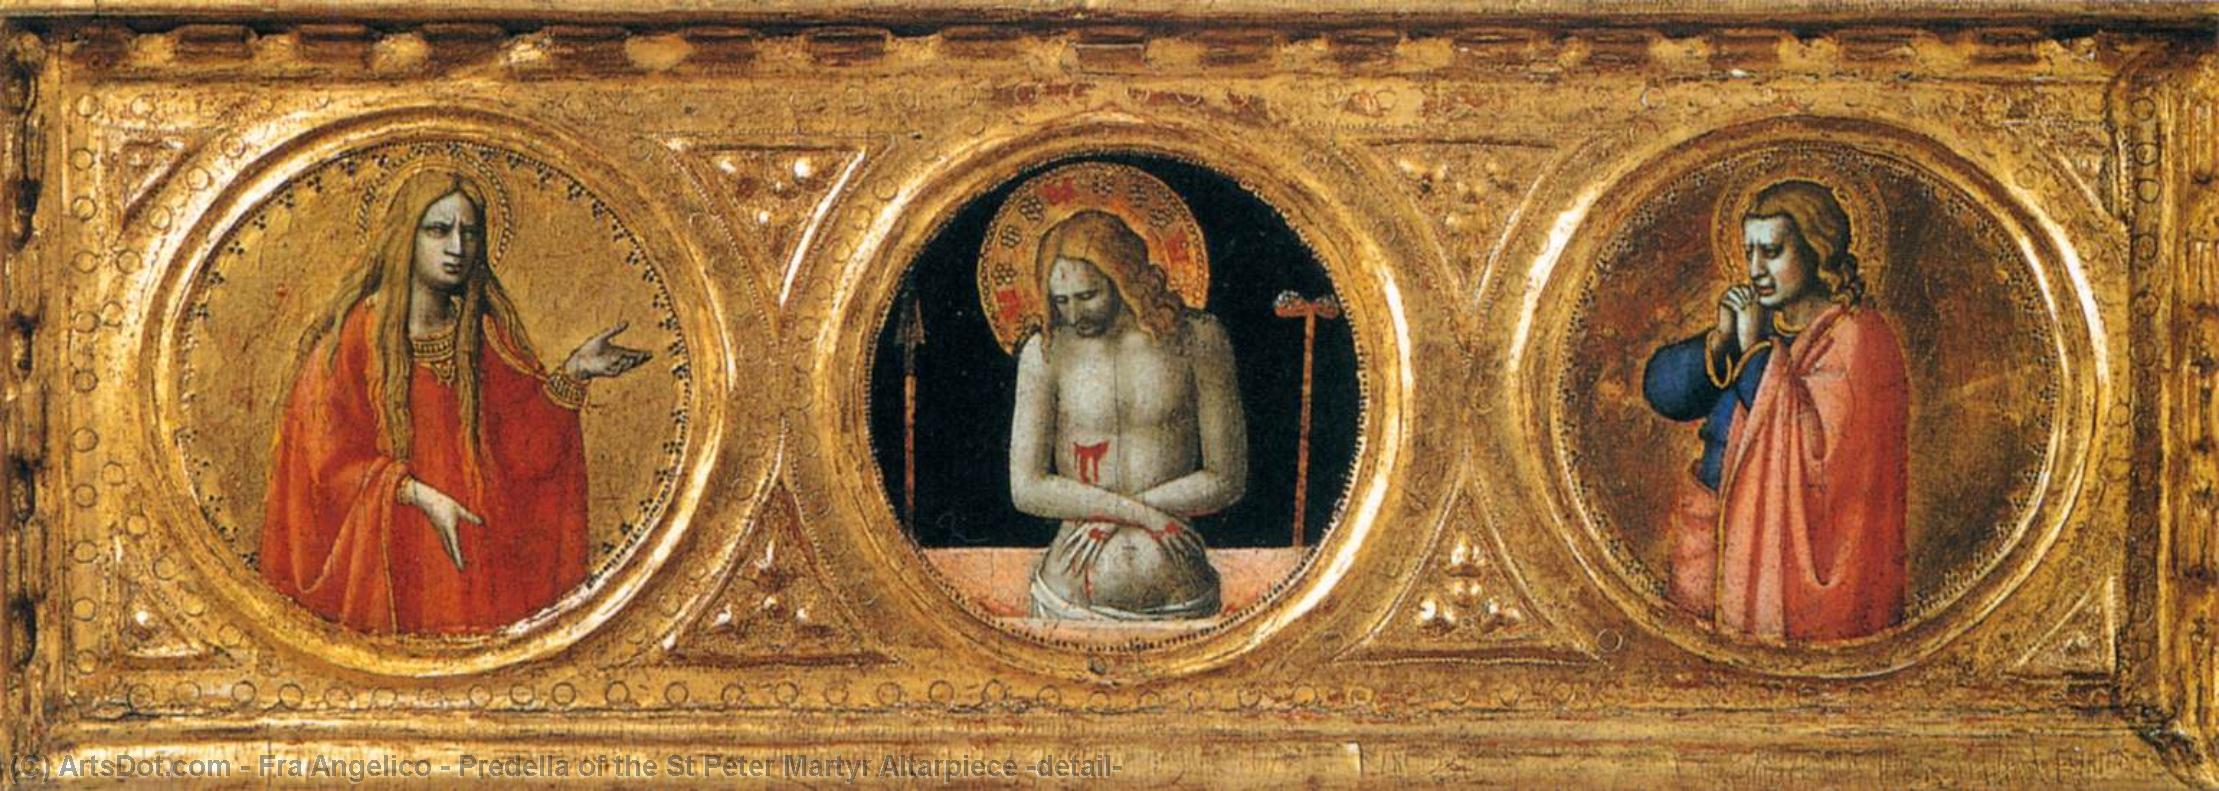 Order Oil Painting Replica Predella of the St Peter Martyr Altarpiece (detail), 1427 by Fra Angelico (1395-1455, Italy) | ArtsDot.com